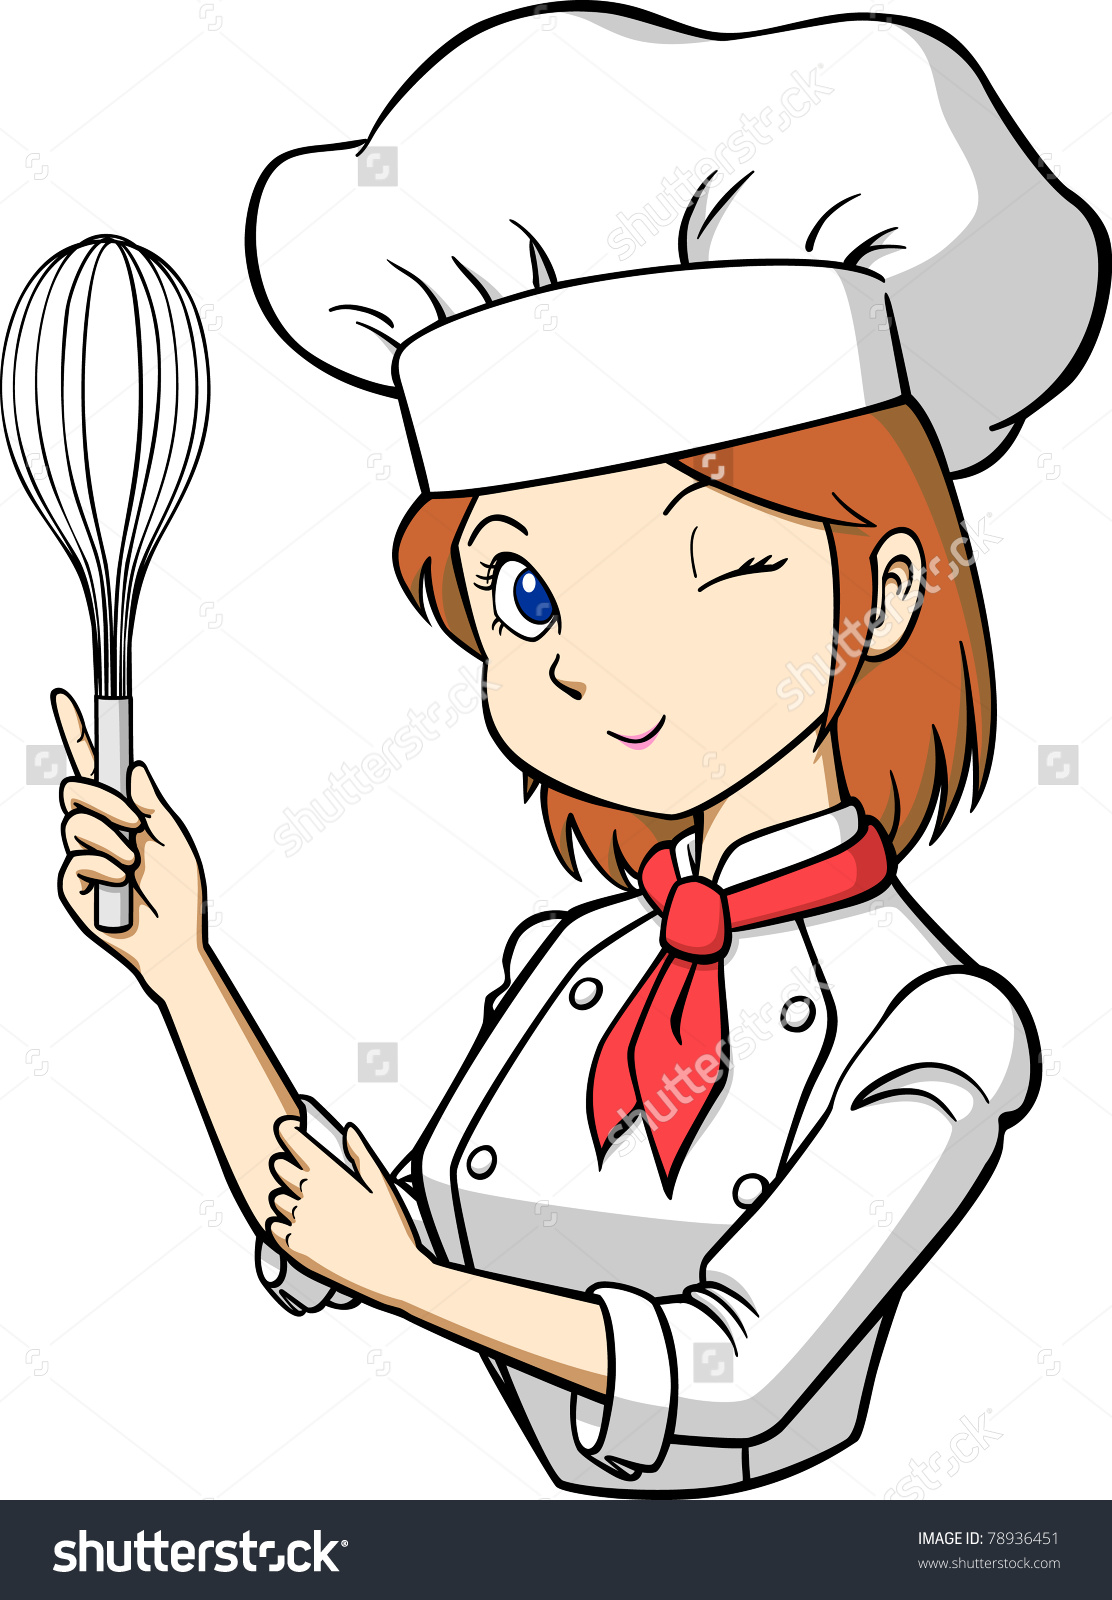 picture-of-cartoon-chef-outline-cartoon-chef-stock-vector-image